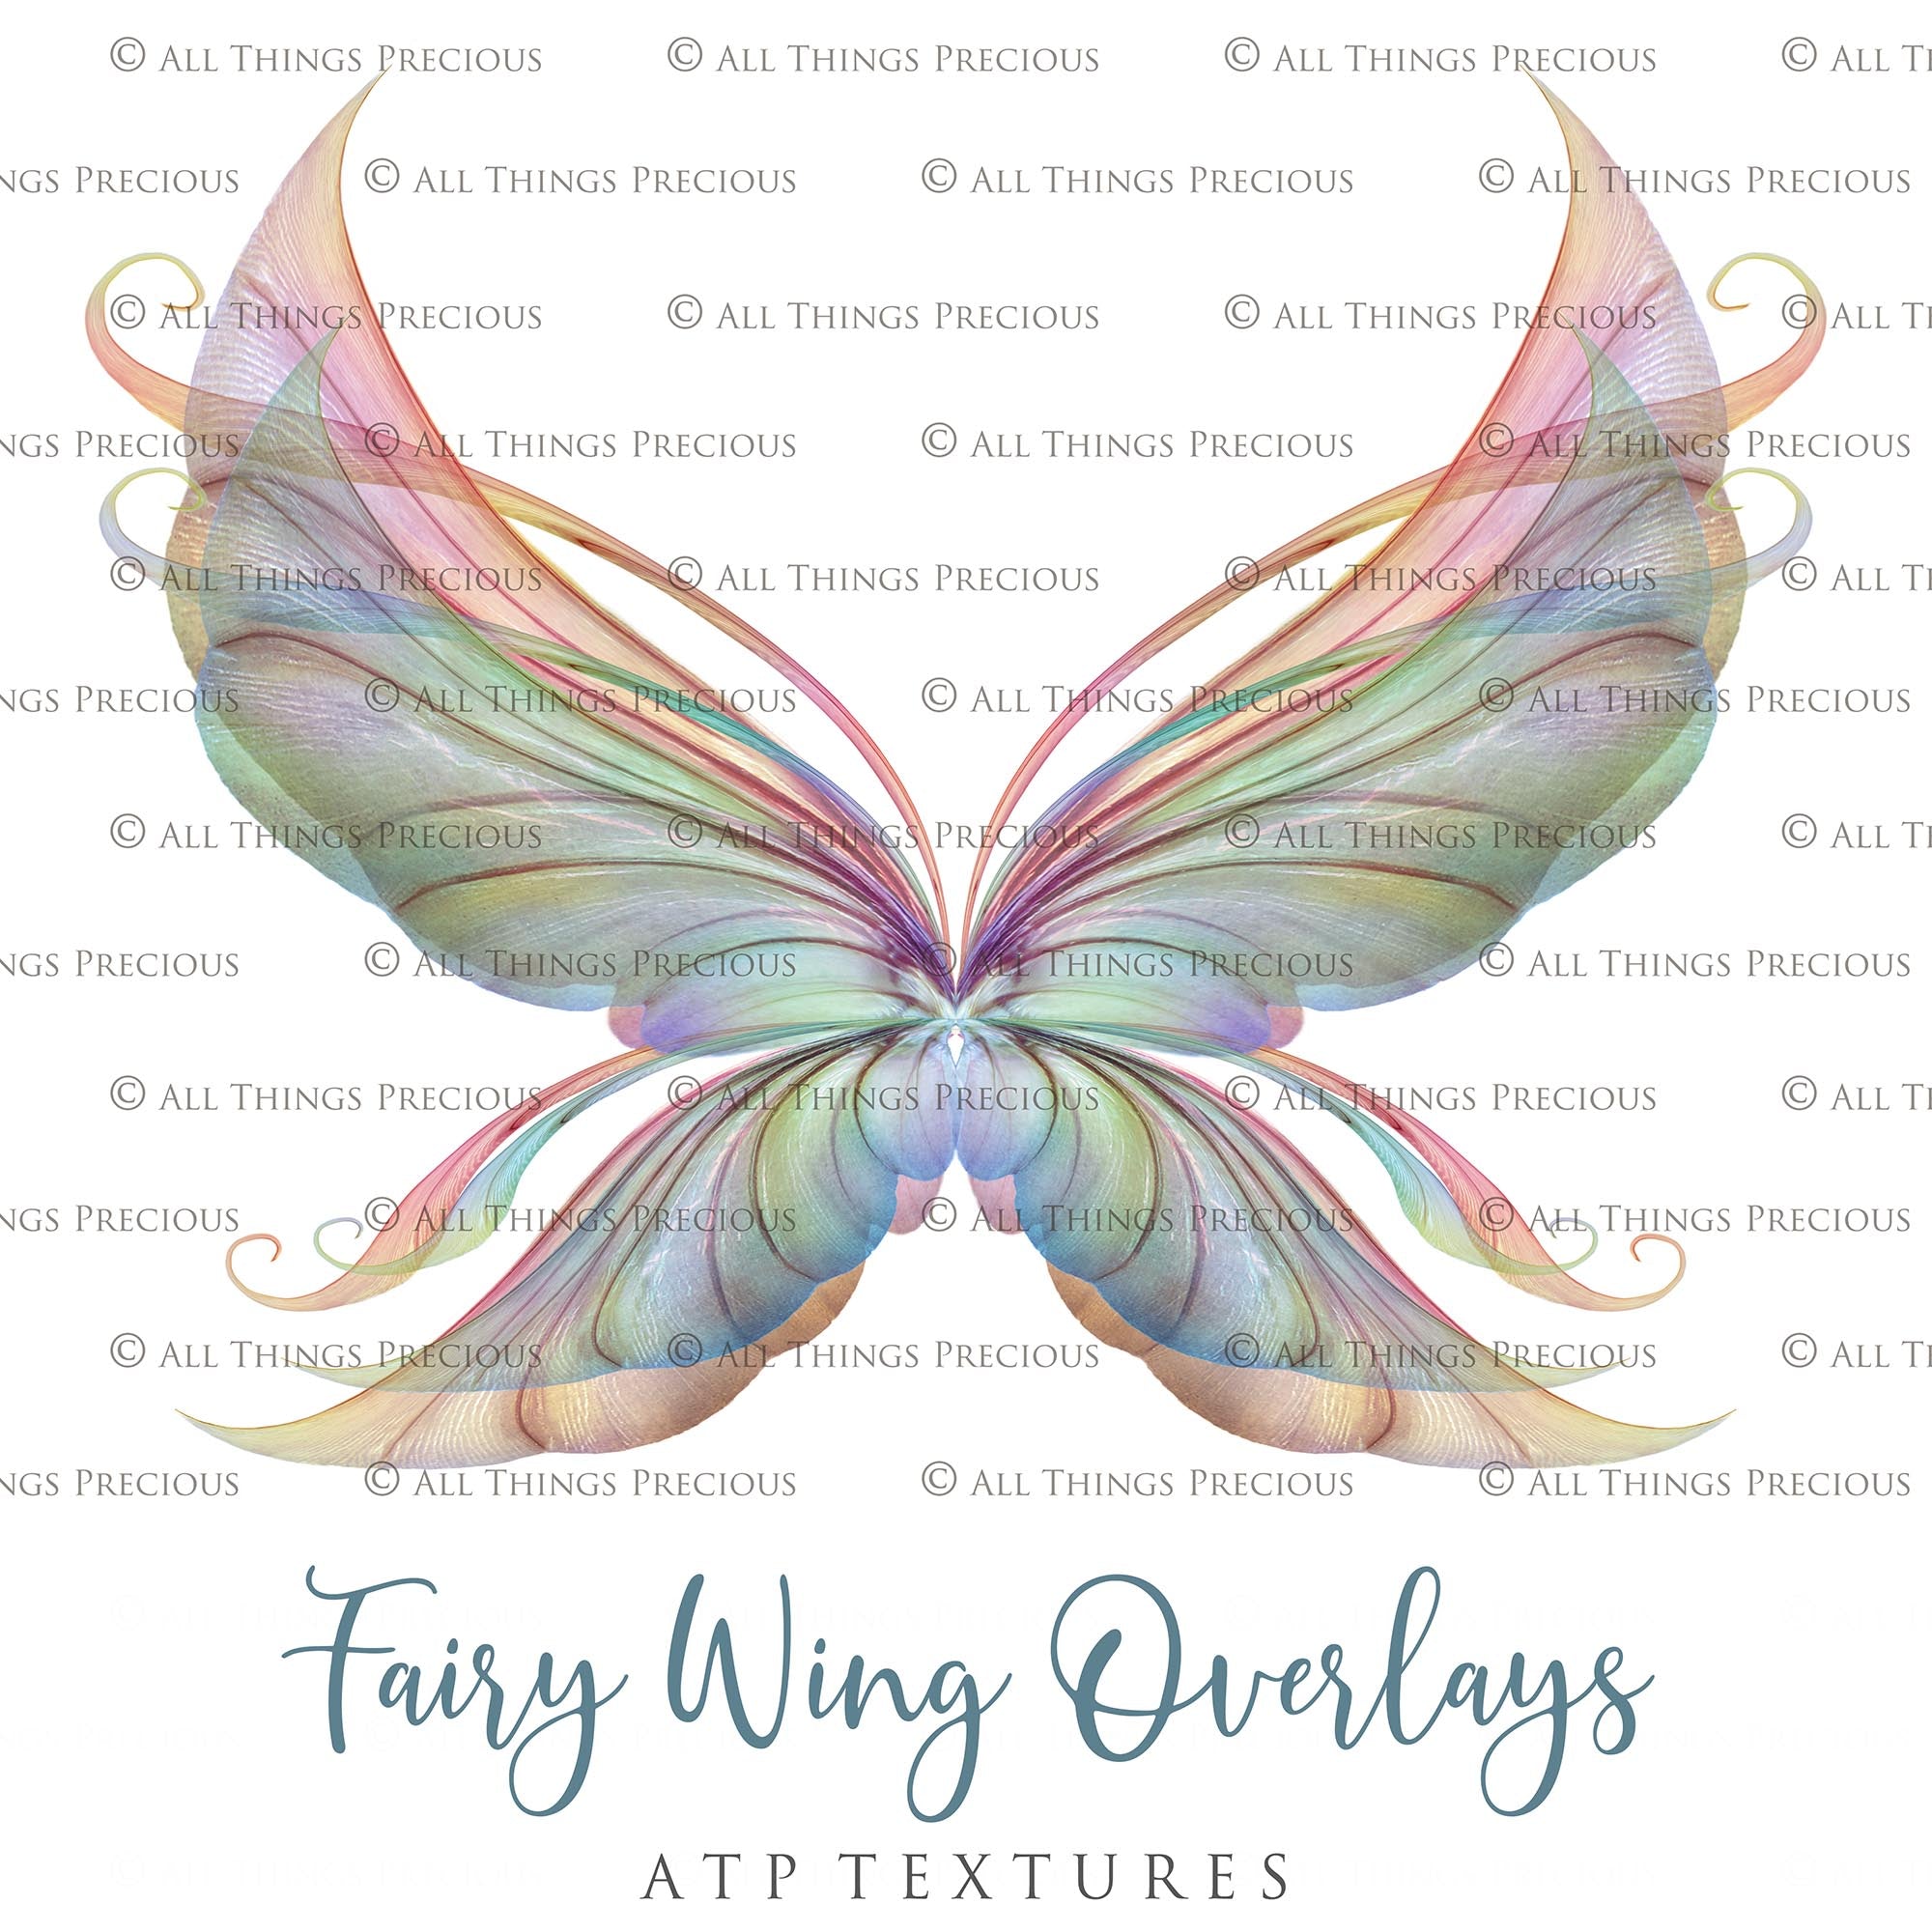 Fairy wings, Png overlays for photoshop. Photography editing. High resolution, 300dpi fairy wings. Overlays for photography. Digital stock and resources. Graphic design. Fairy Photos. Colourful Fairy wings. Faerie Wings.